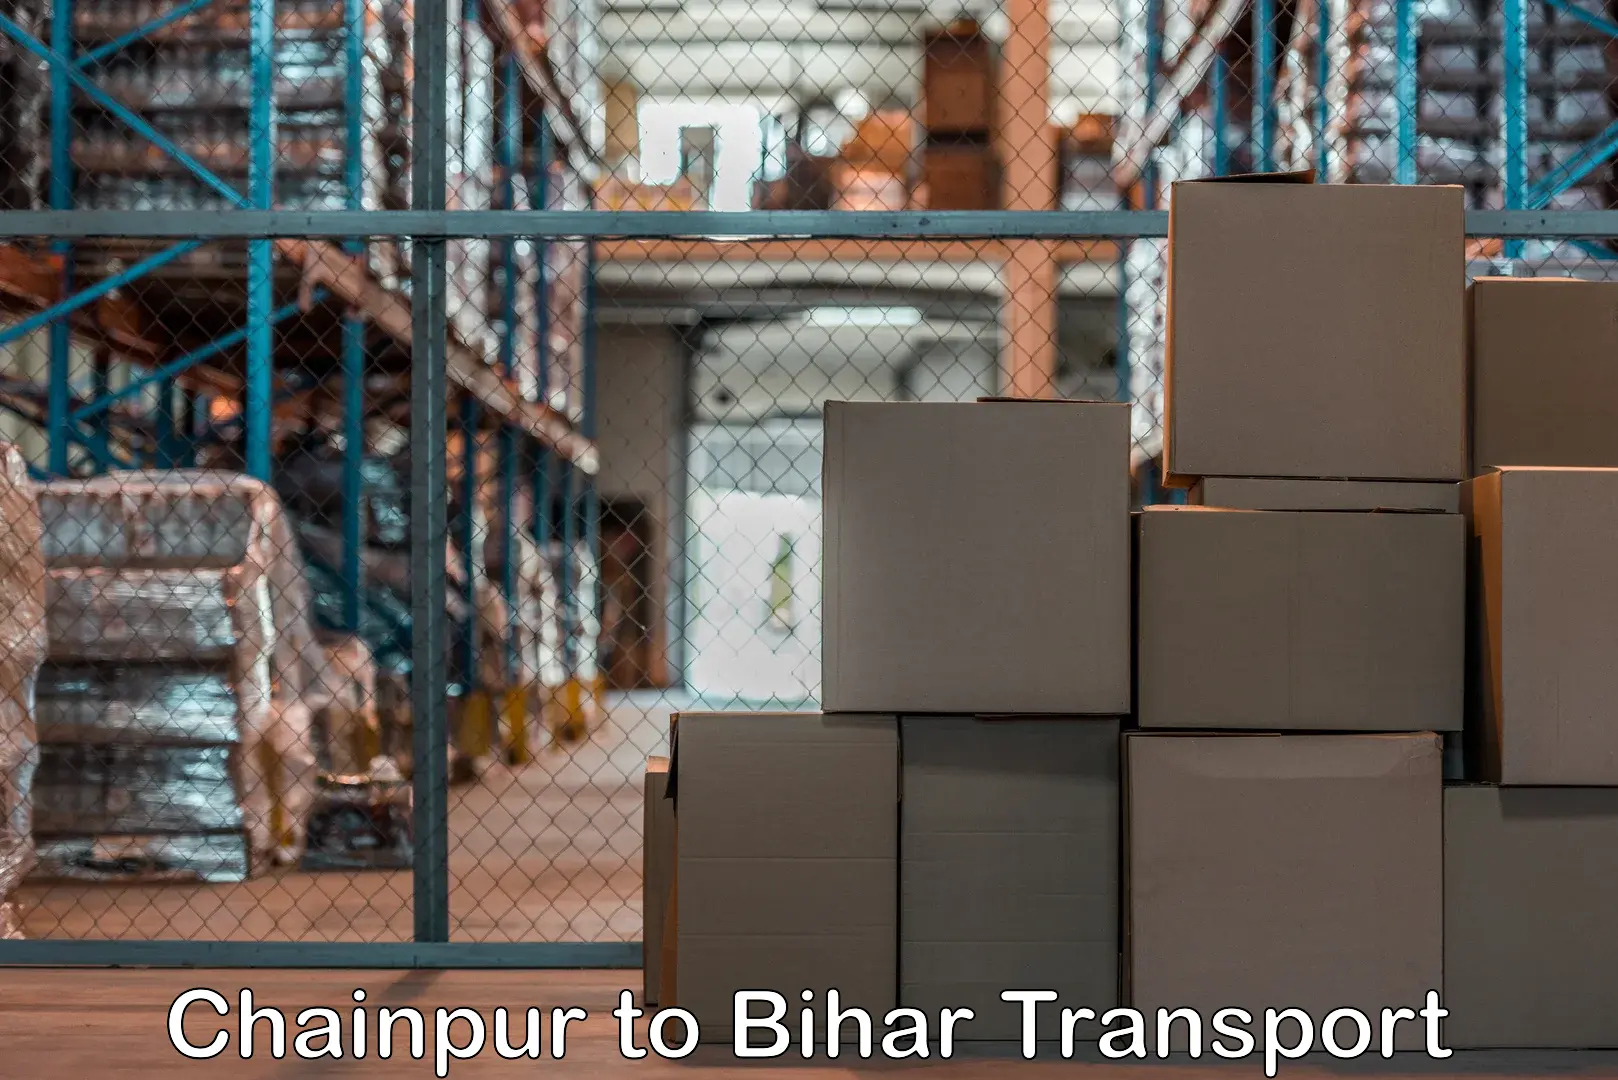 Container transport service Chainpur to Sahebpur Kamal